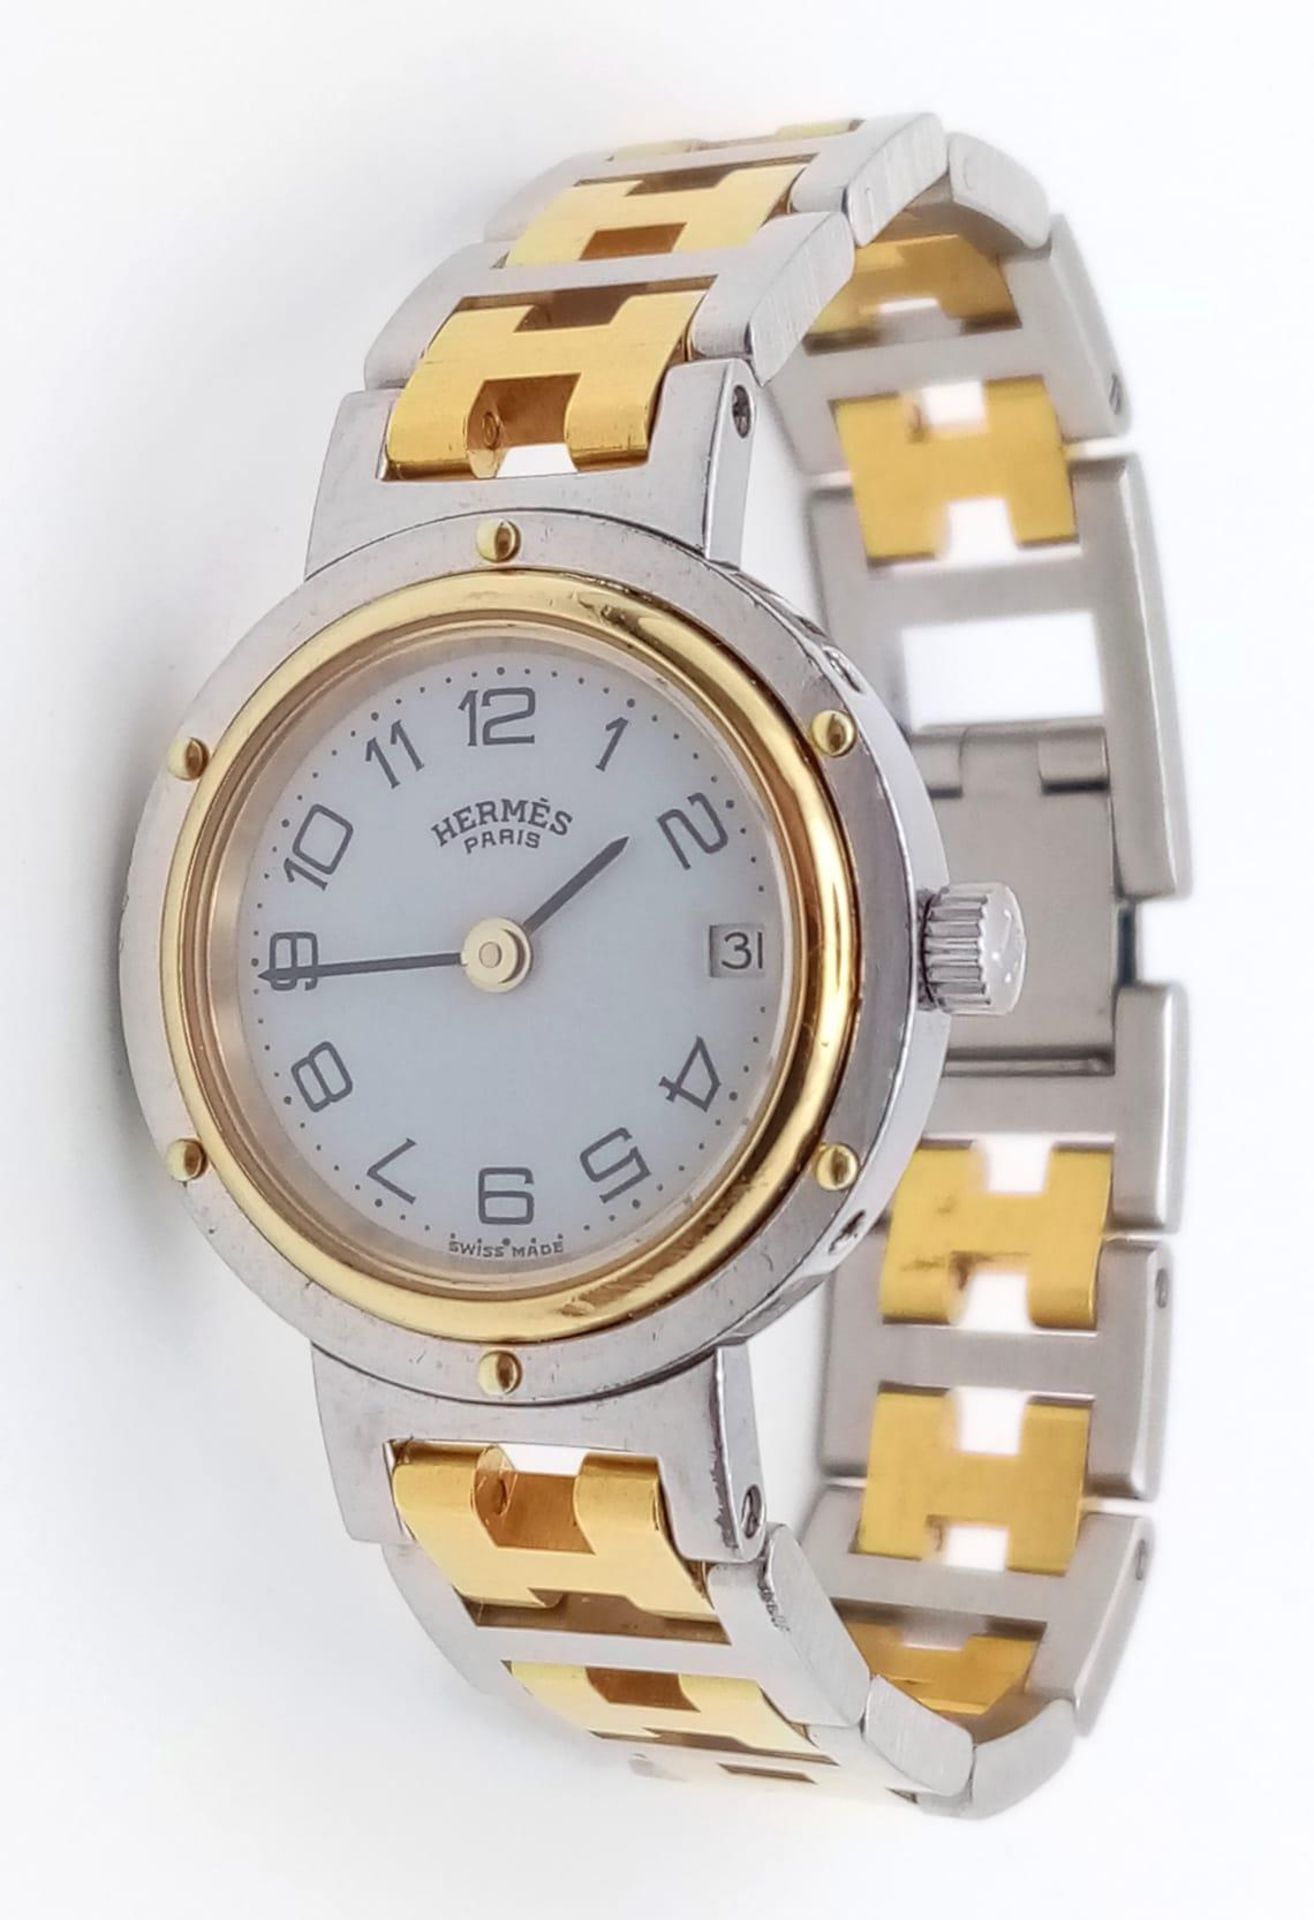 A Designer Hermes Quartz Ladies Watch. Two tone stainless steel bracelet and case - 25m. White